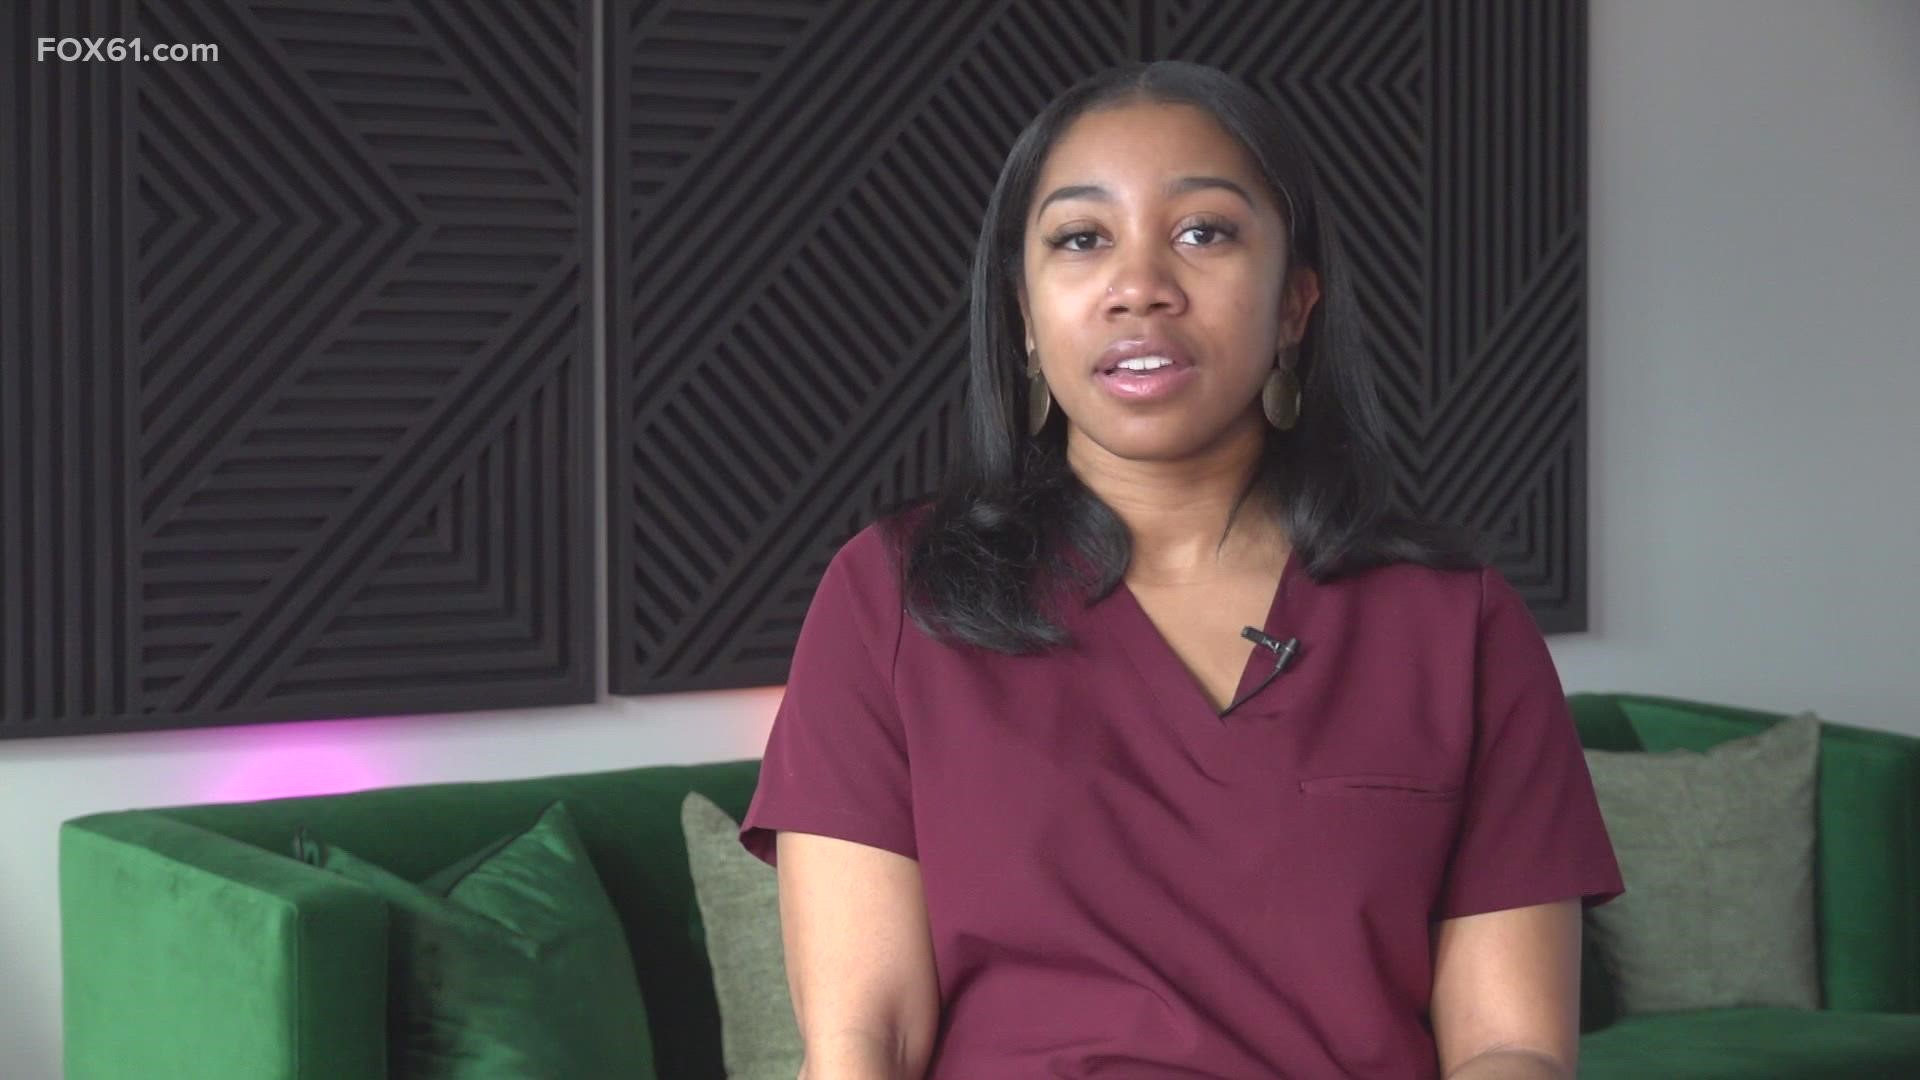 For two providers FOX61 spoke with, it’s not only what connects them, but it’s what motivates them to work and create change in medicine for people of color.